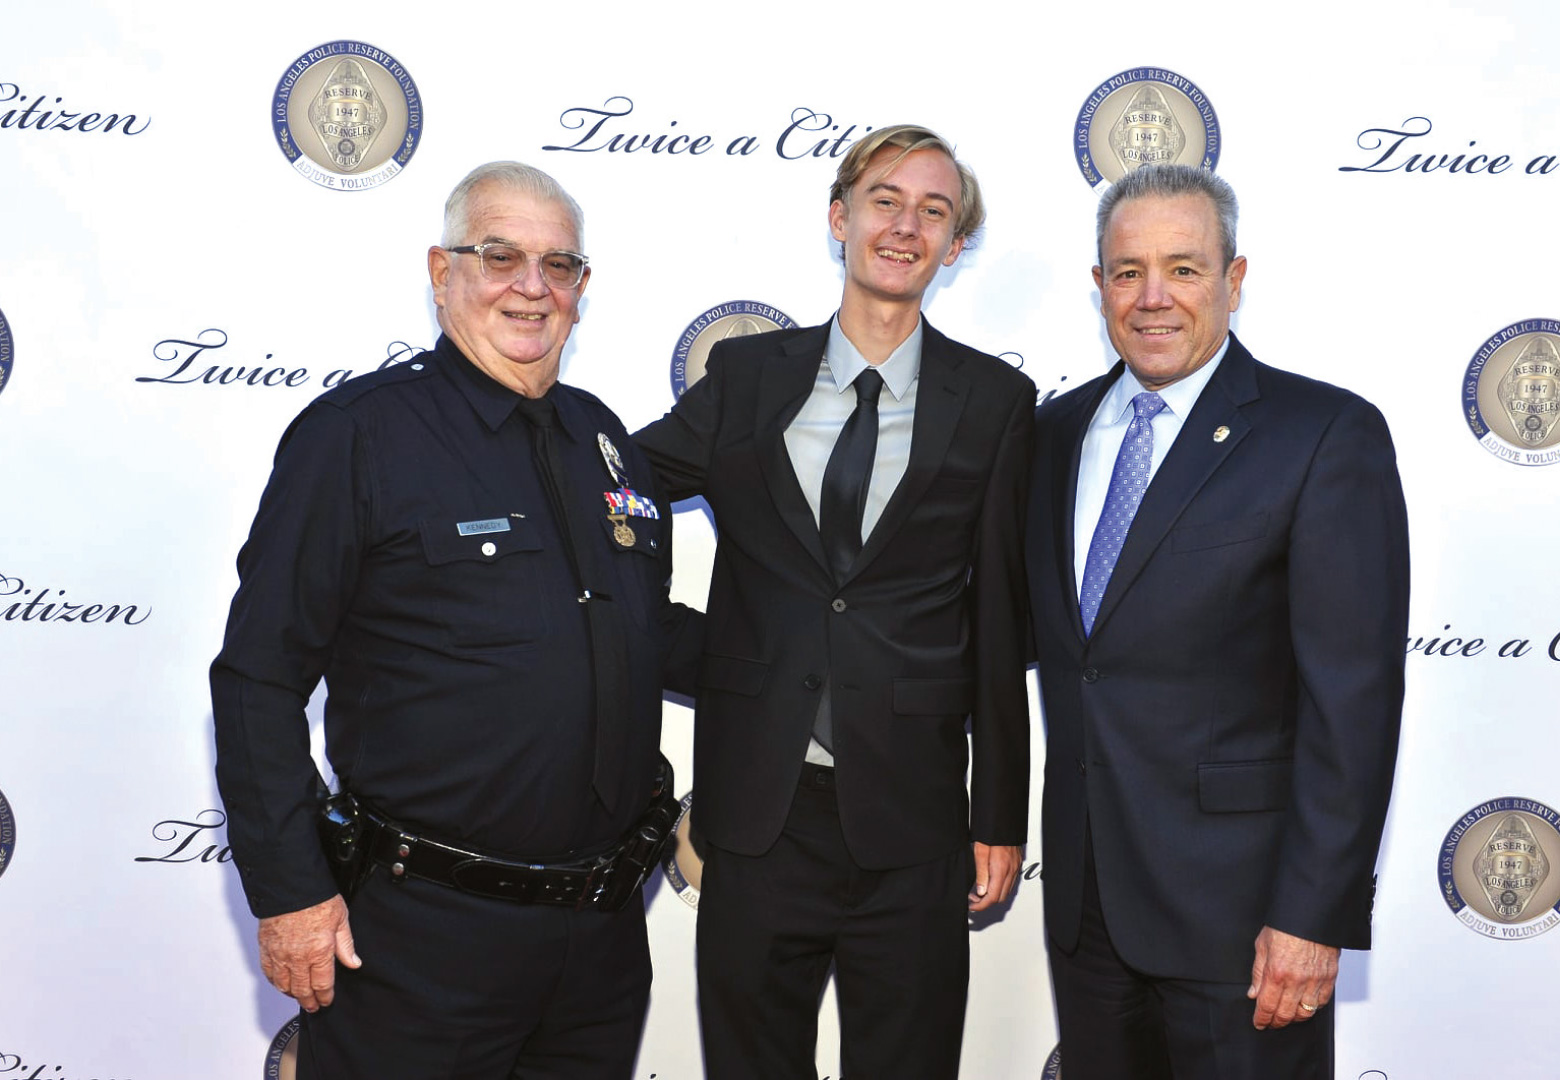 skirball-reopens-reserve-officer-of-the-year-twice-a-citizen-gala-12